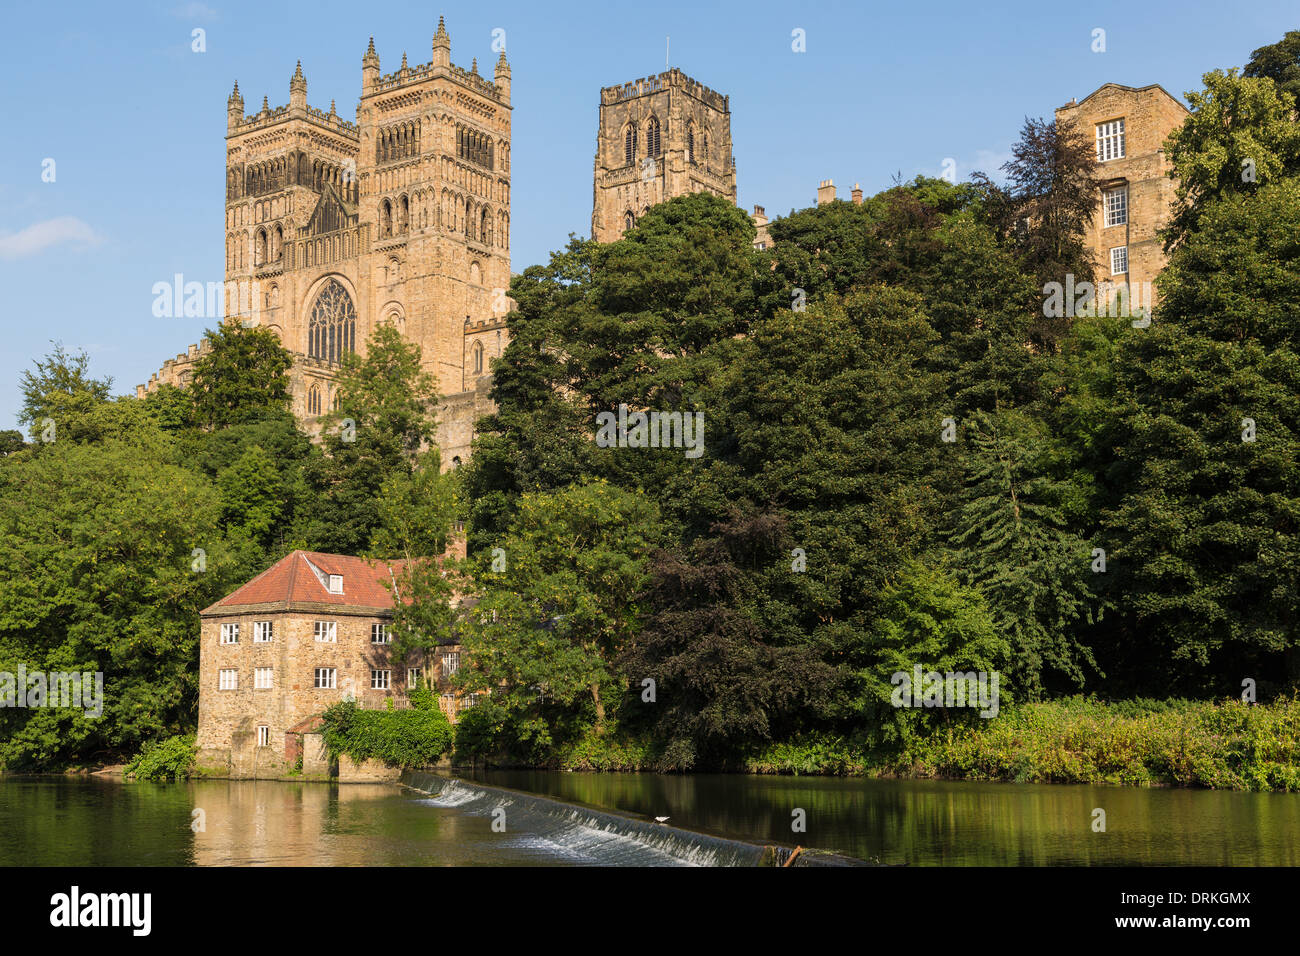 Durham Castle and River Wear, England Stock Photo